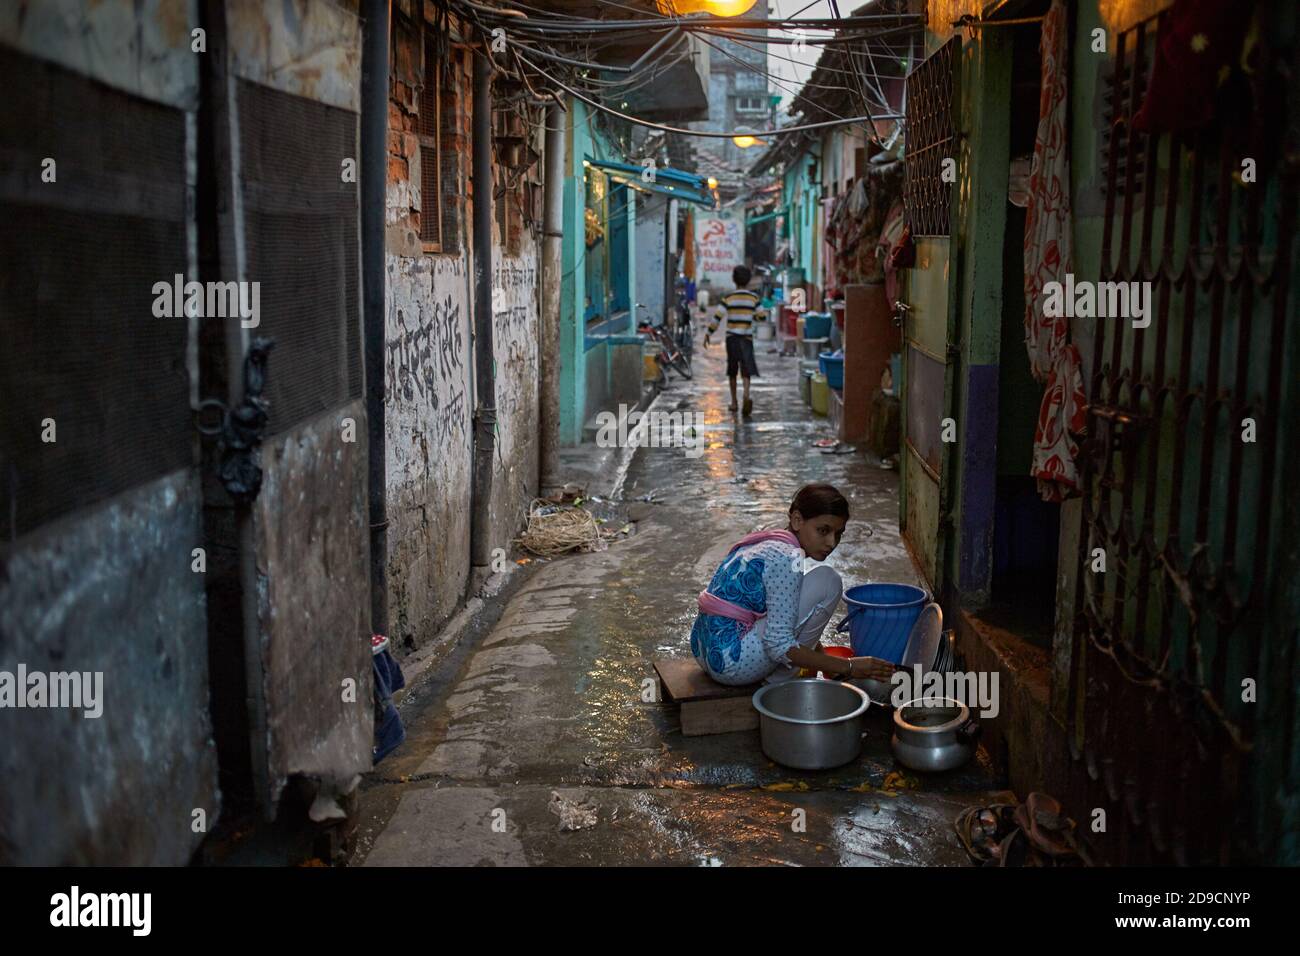 Kolkata, India, January 2016. A girl working washing dishes in the middle of a narrow street. Stock Photo